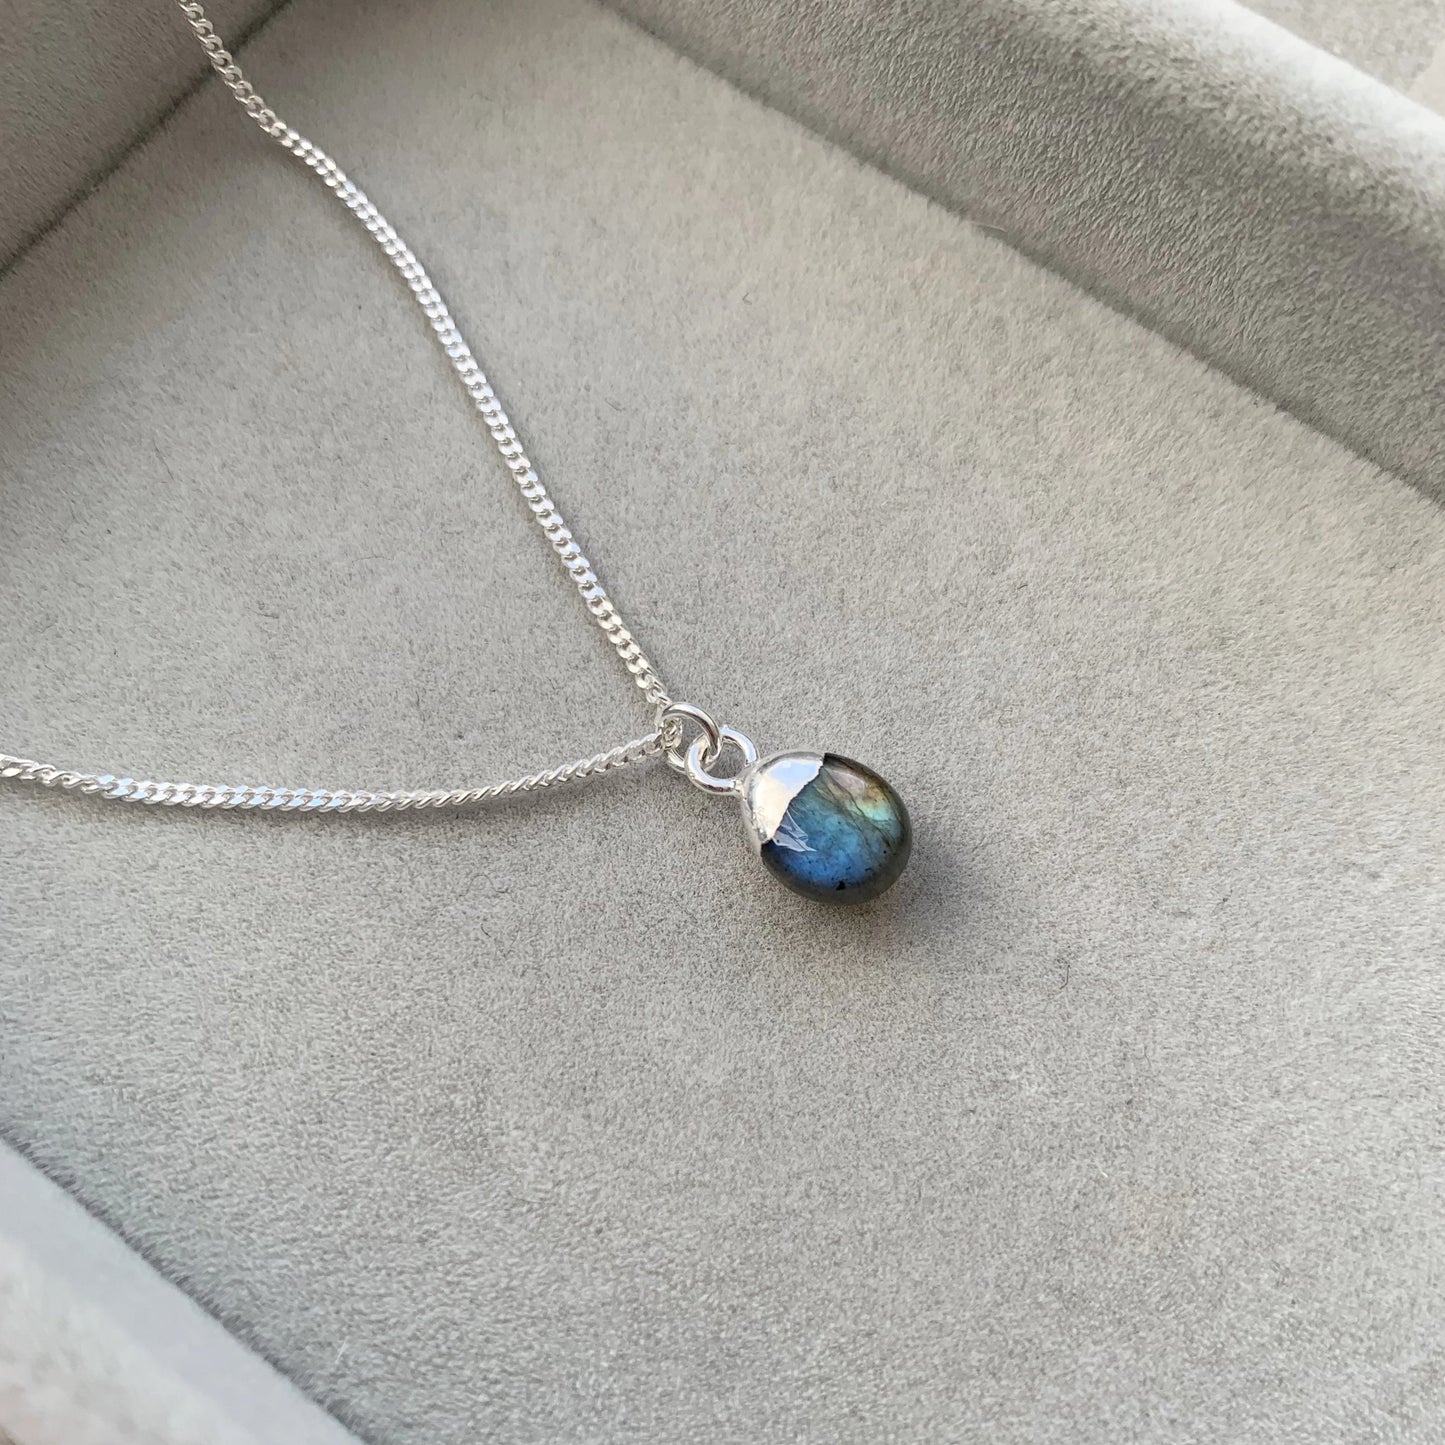 Load image into Gallery viewer, Tiny Tumbled Gemstone Necklace - Silver - Labradorite (Adventure) - Decadorn
